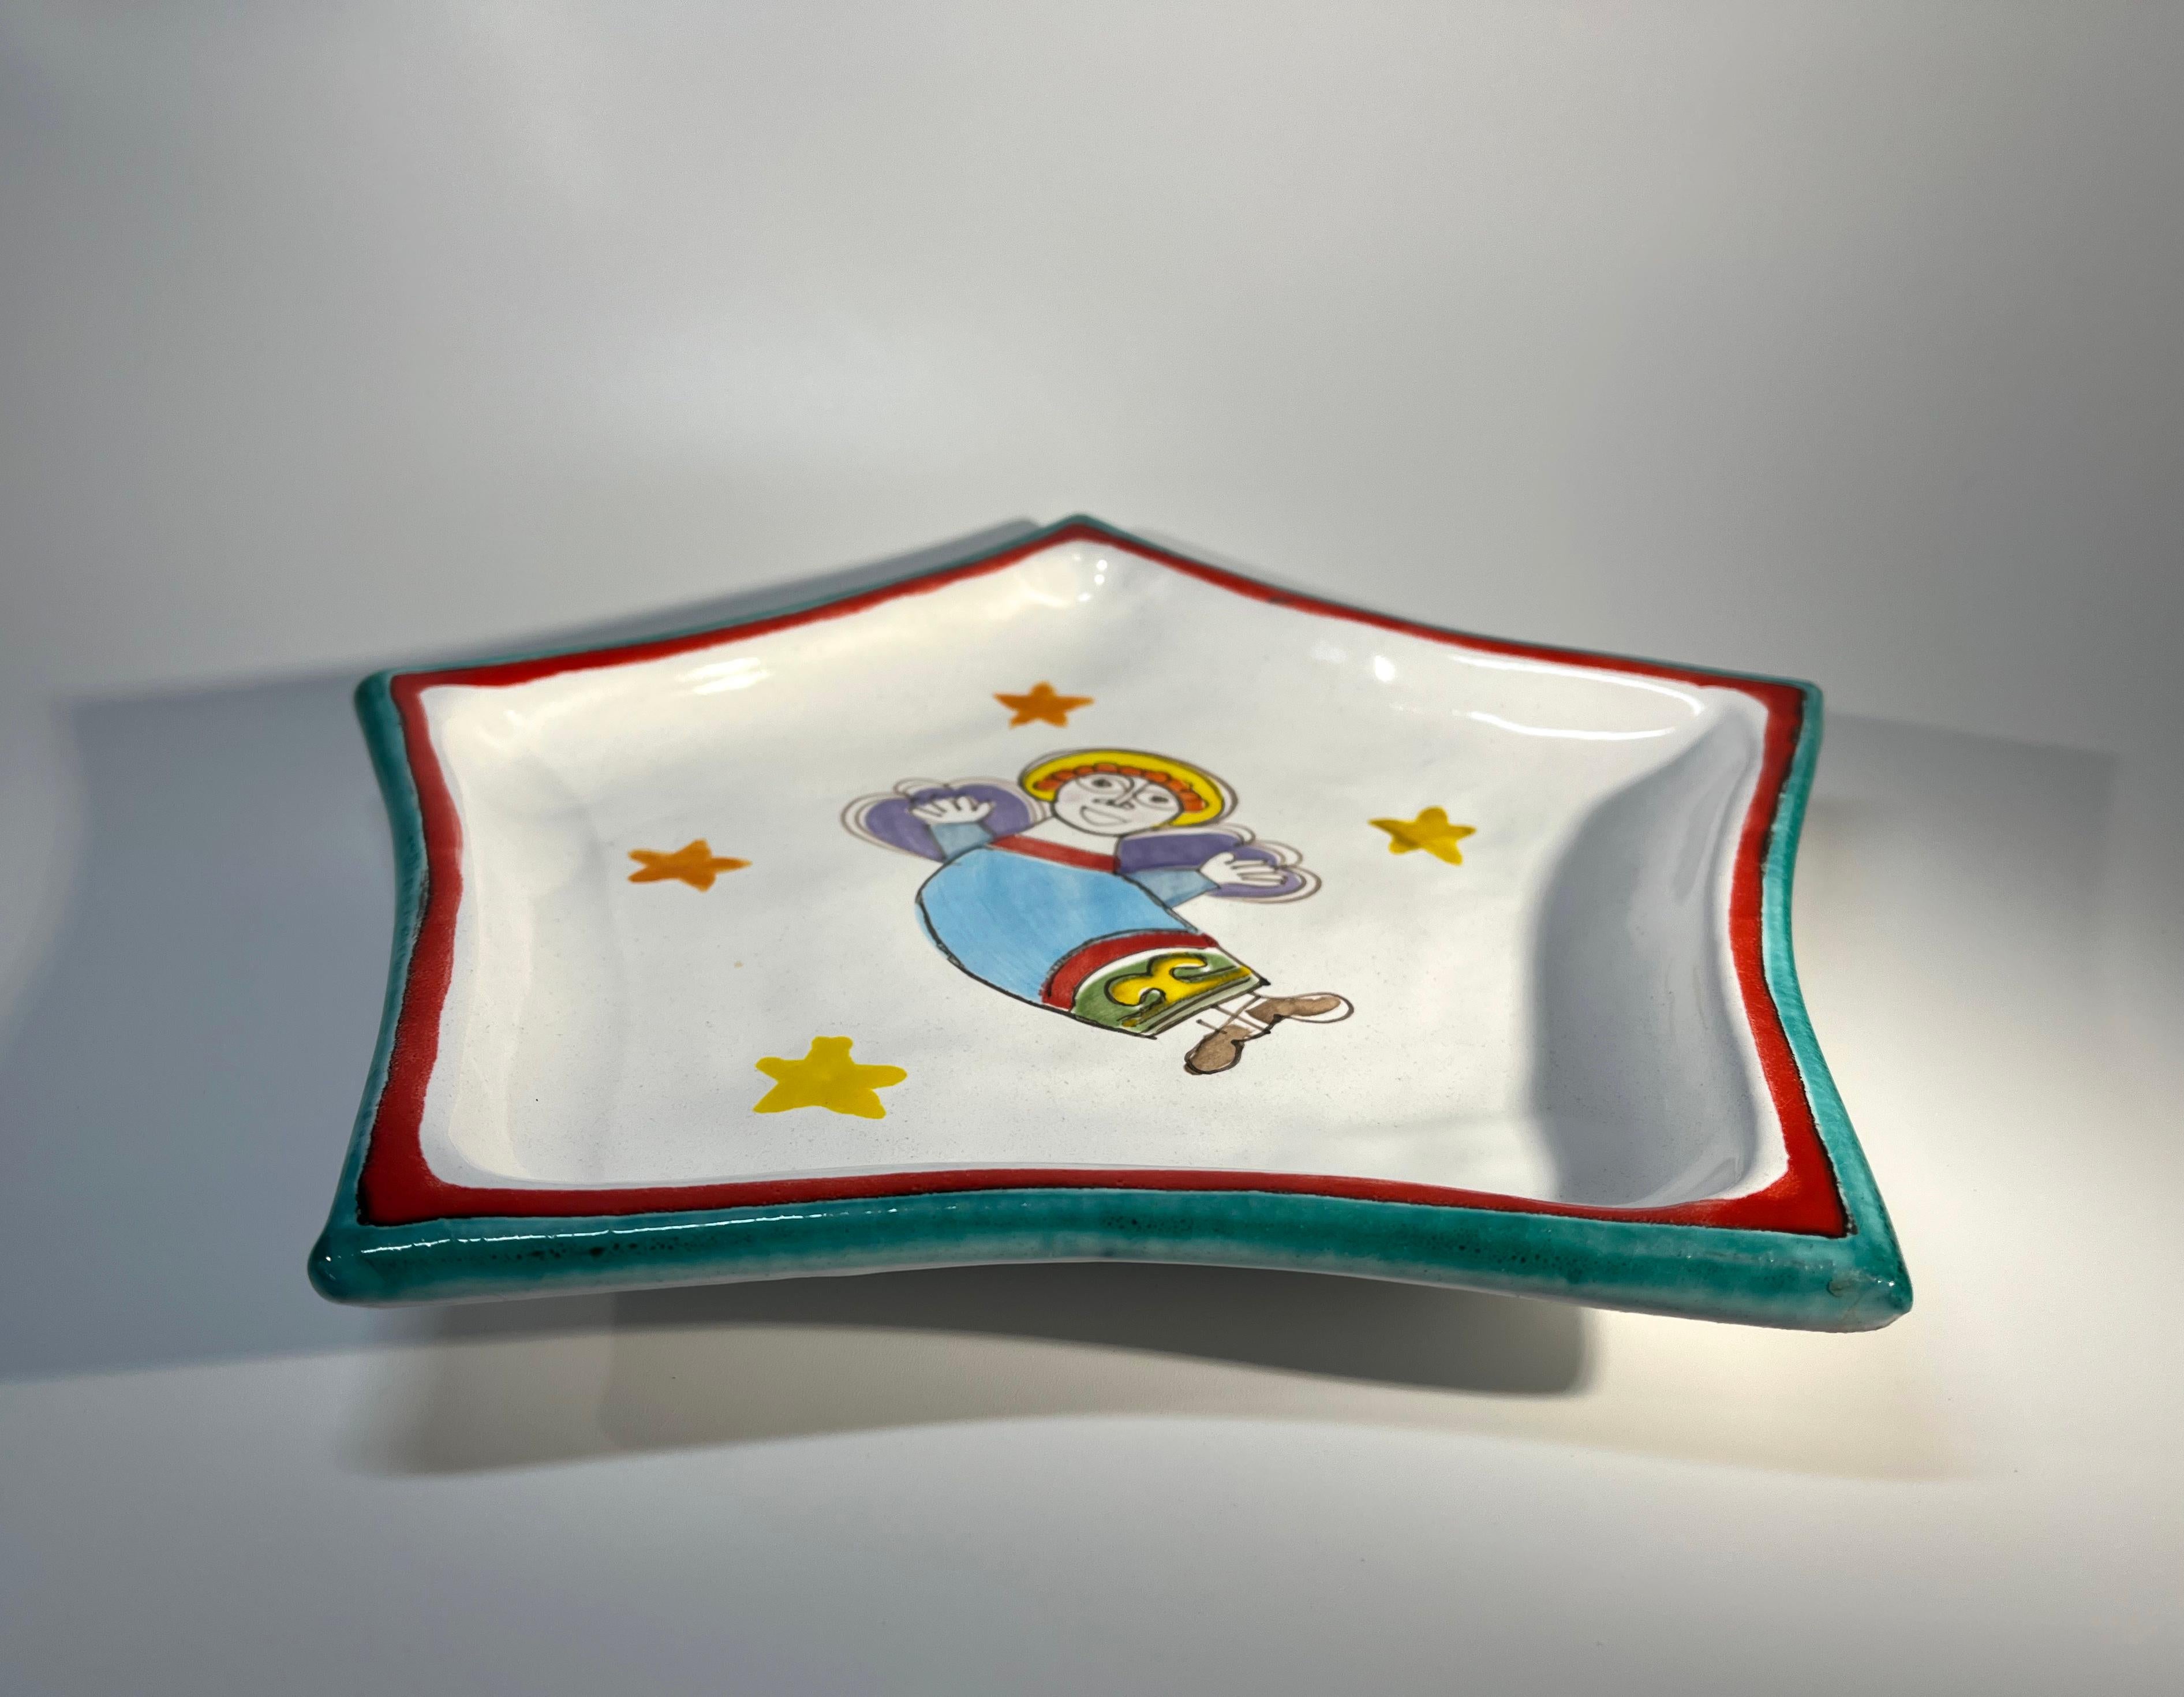 20th Century Heavenly And Joyous Angel Ceramic Star Platter By DeSimone, Italy, c1960 For Sale